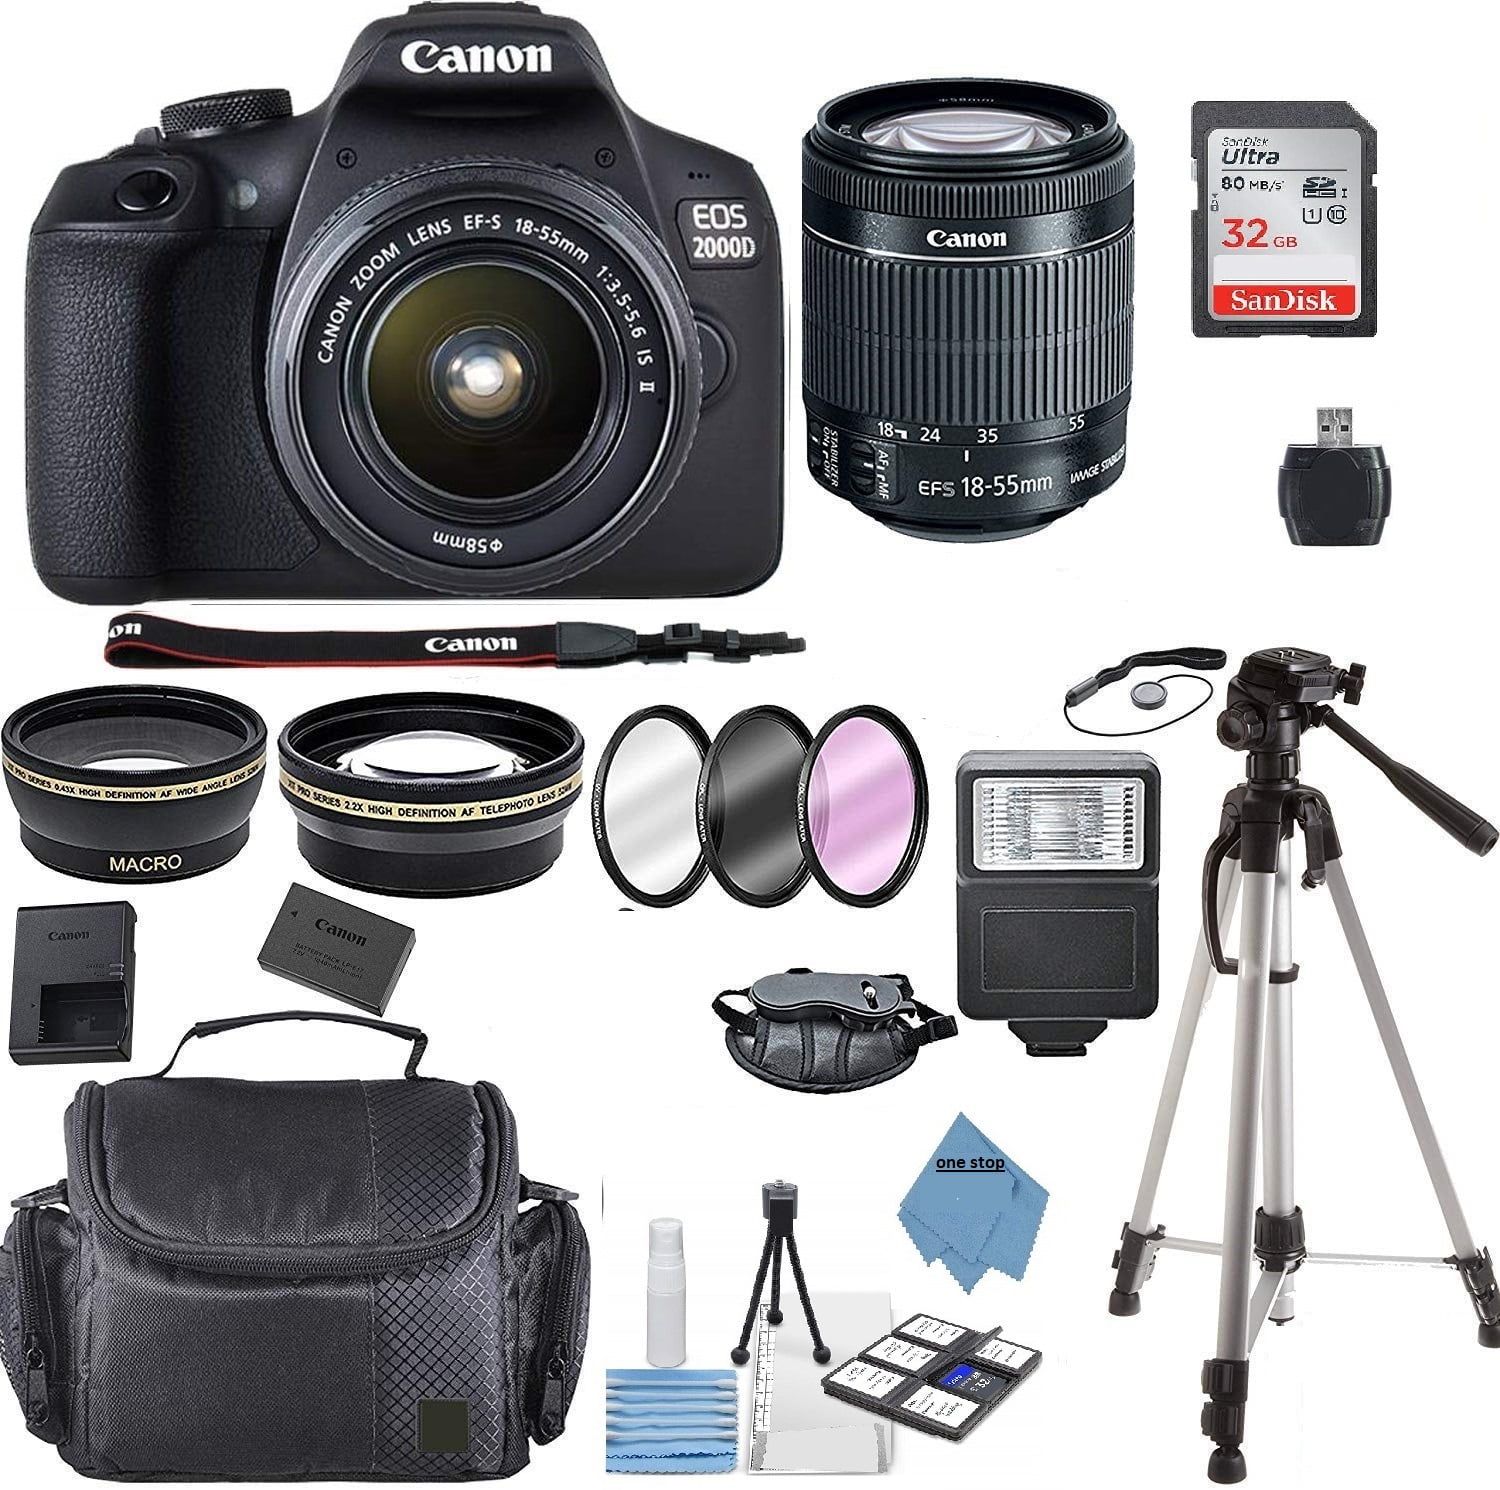 Canon EOS 2000D Rebel T7 Kit with EF-S 18-55mm f/3.5-5.6 III Lens +  Accessory Bundle 